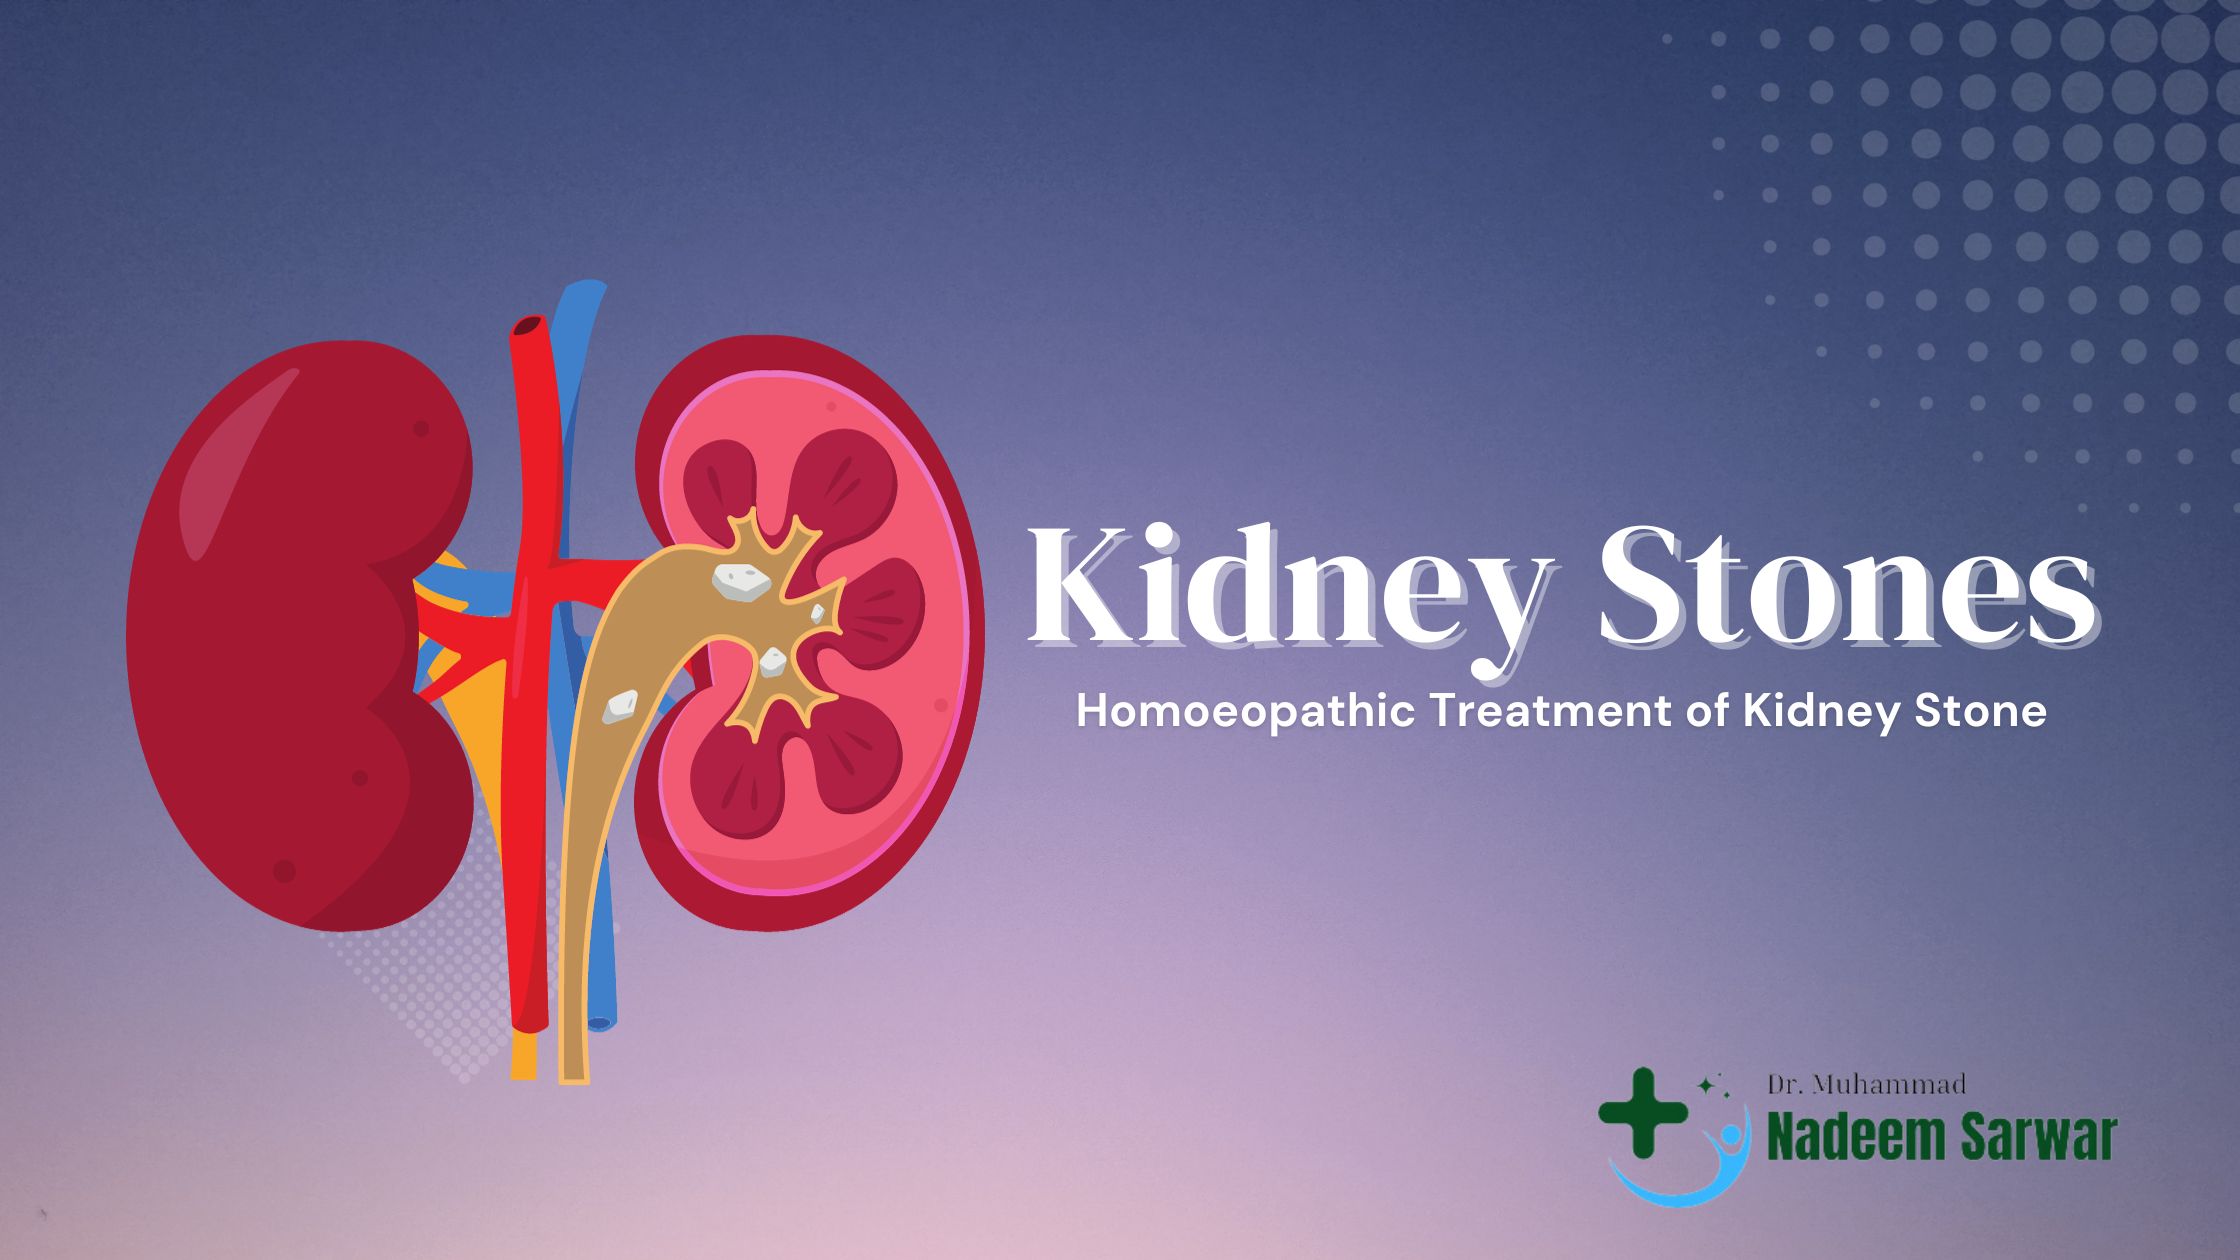 Kidney Stones and Their Homoeopathic Treatment